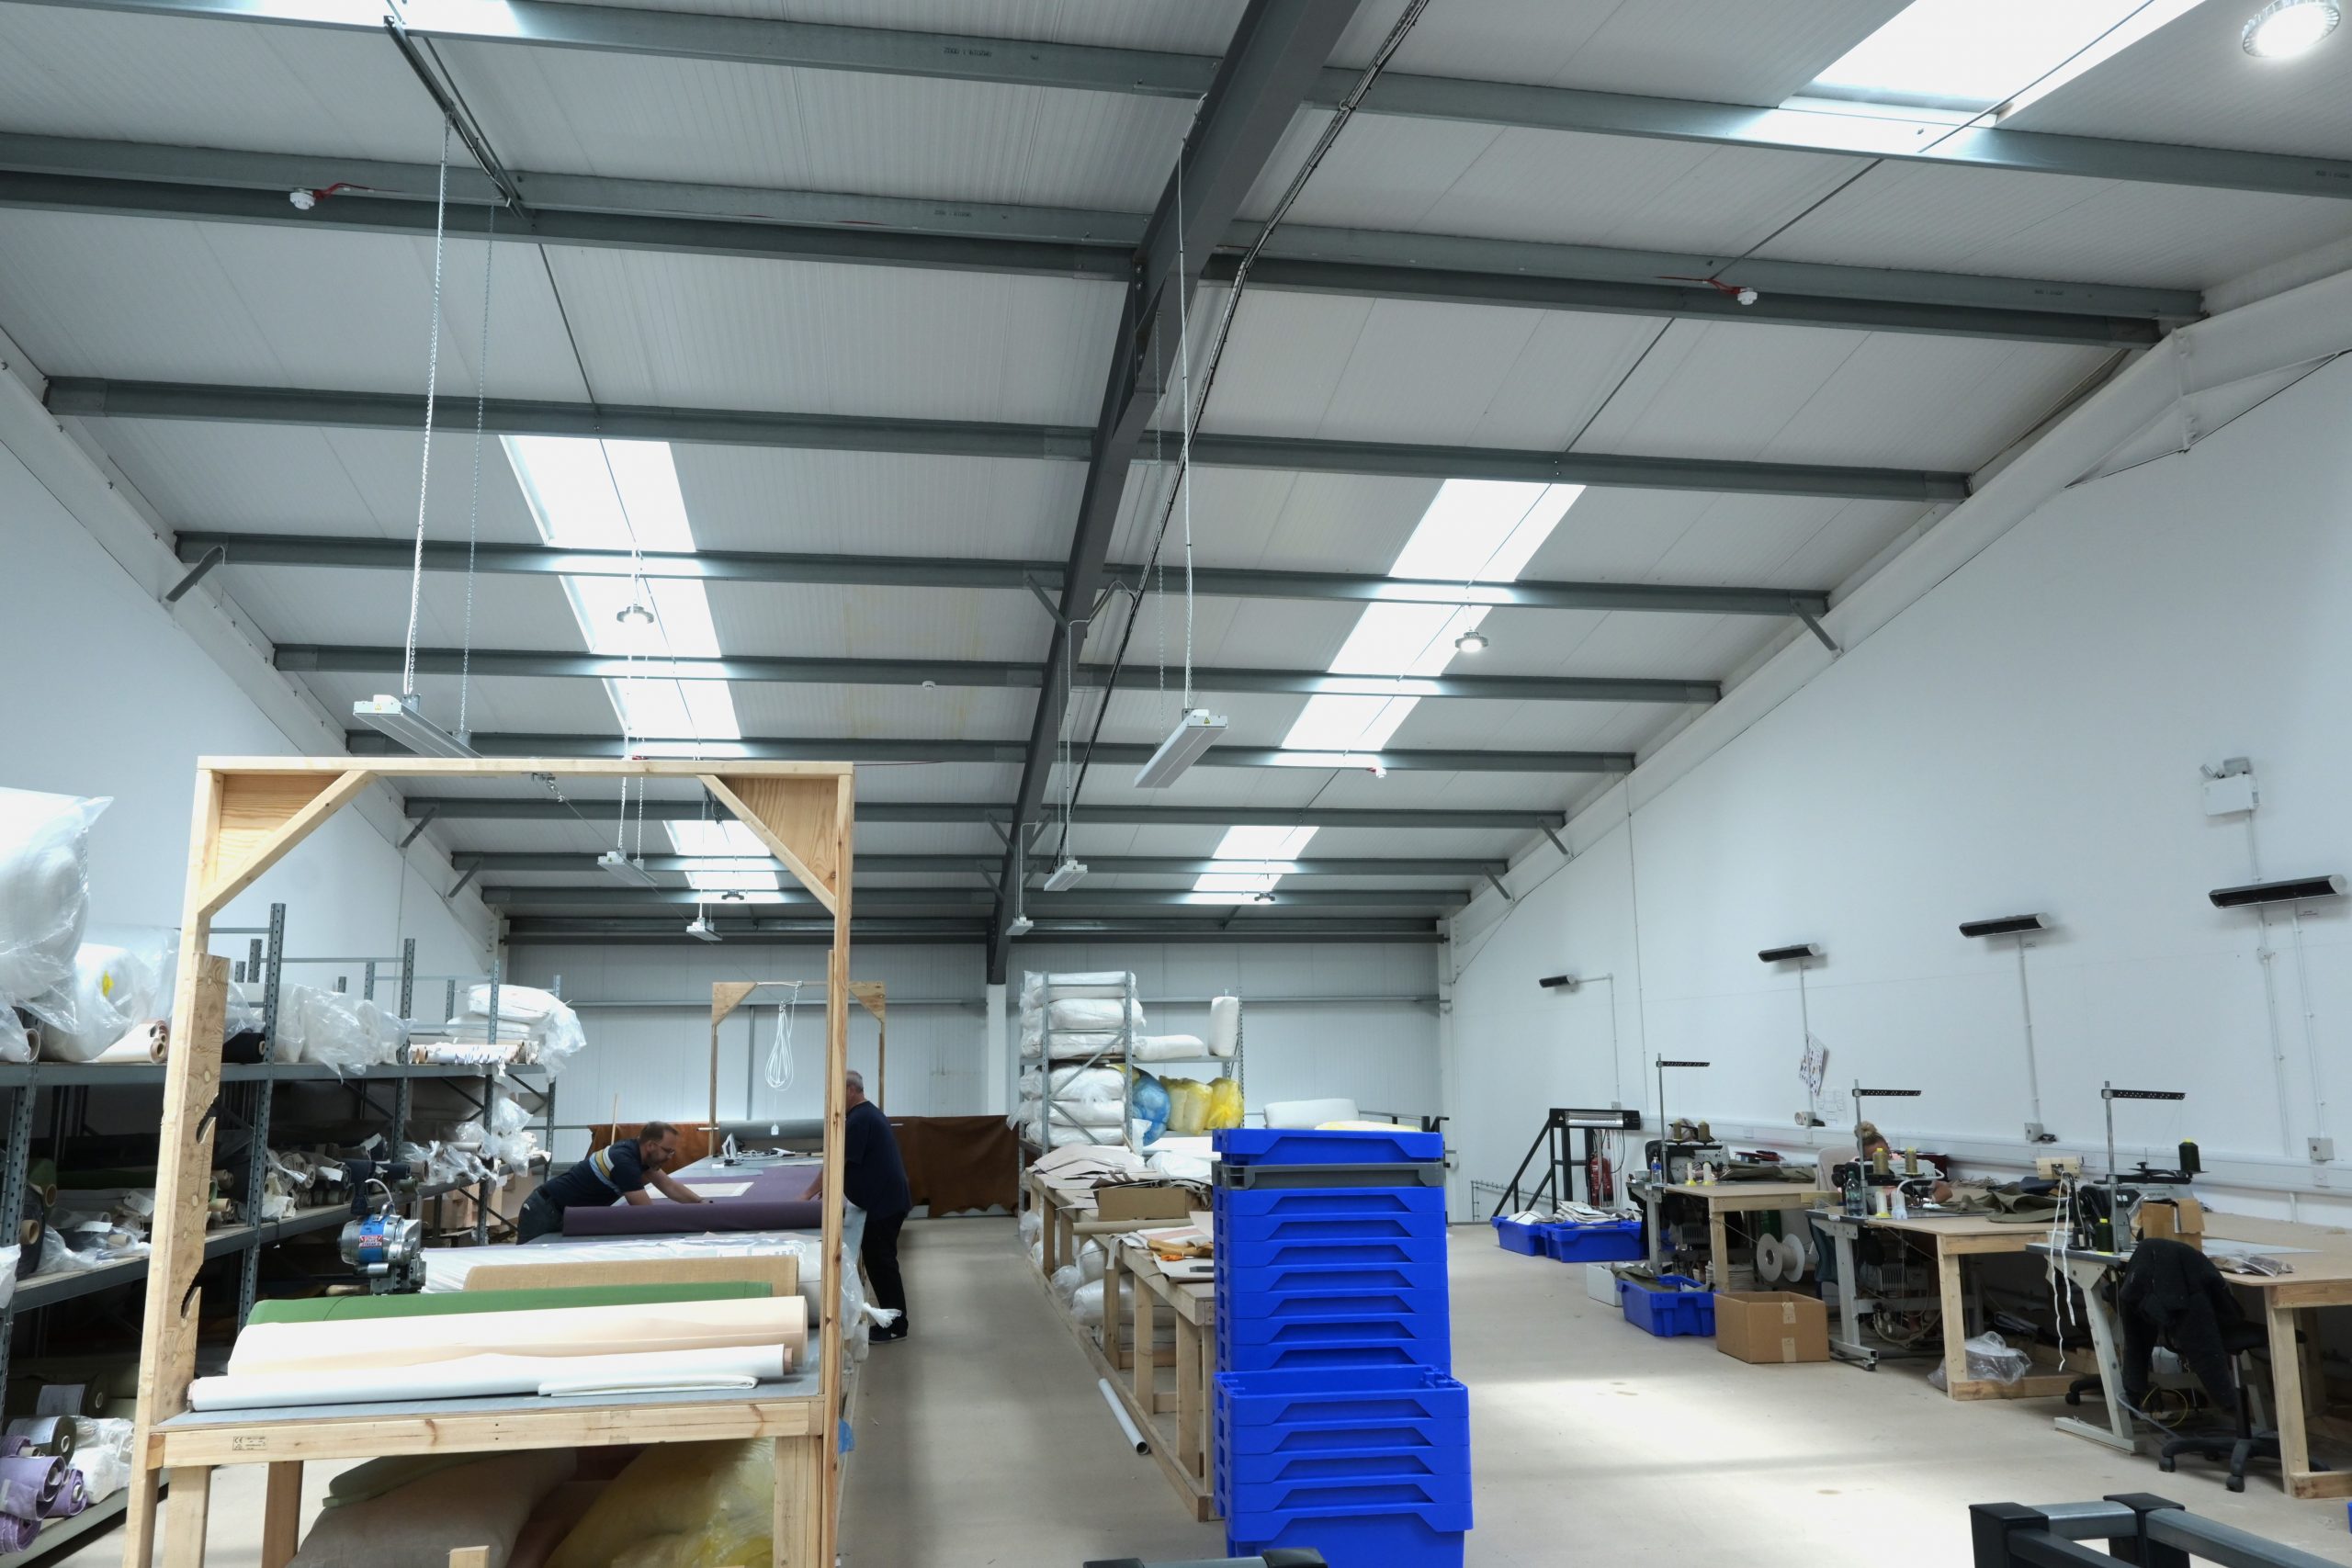 Heating Warehouses with Summit White heaters